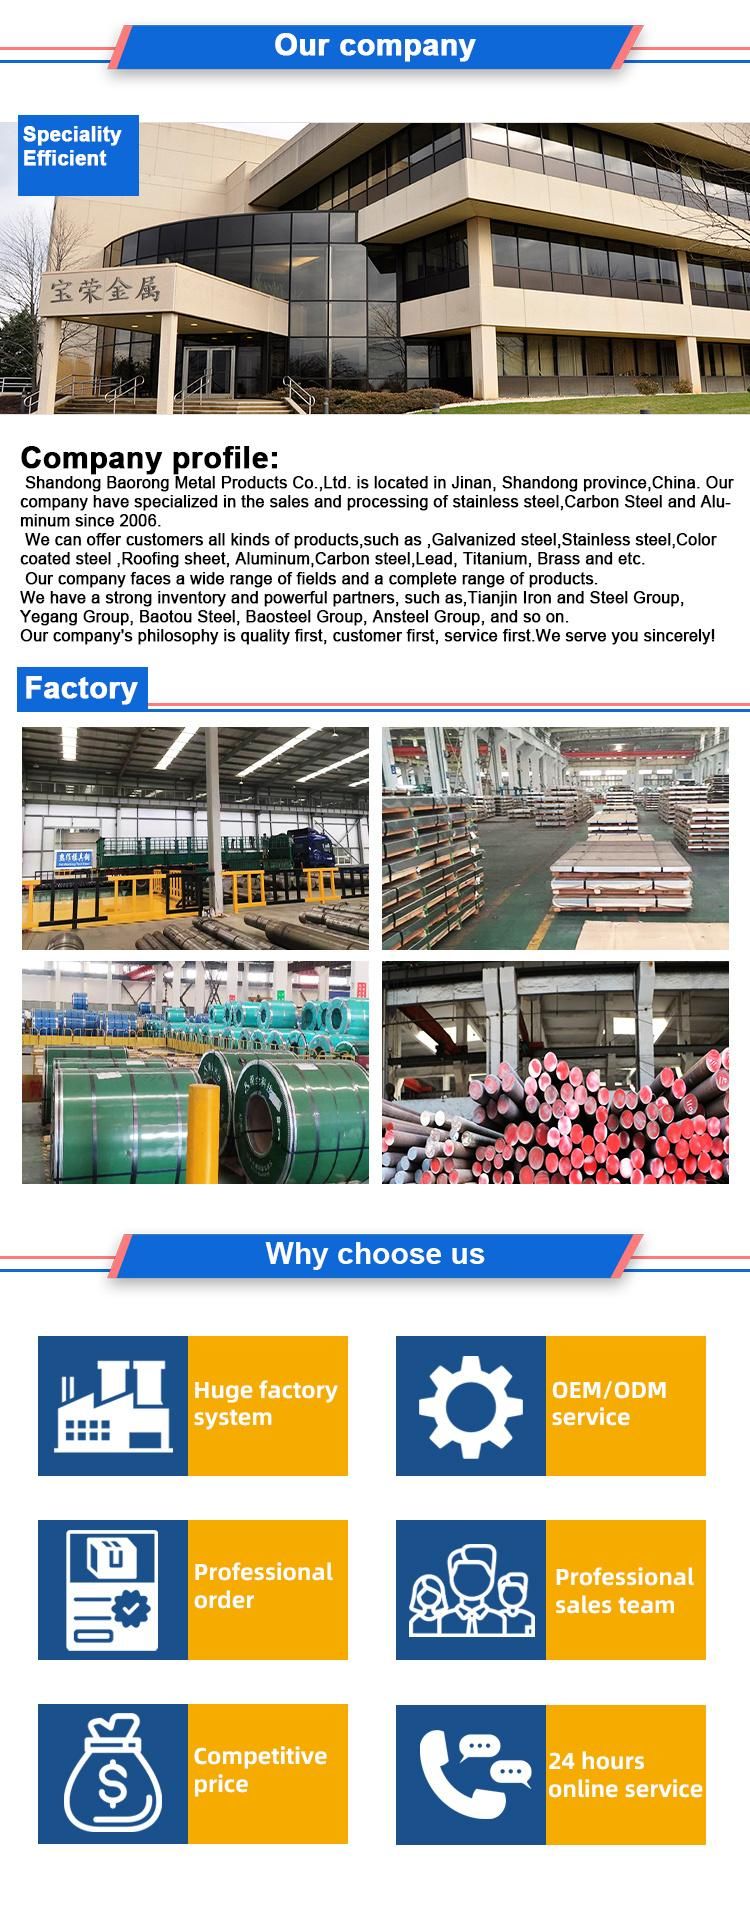 309S 310S 321 316 316L Welded Stainless Steel Pipe Production of 304 Stainless Steel Pipe